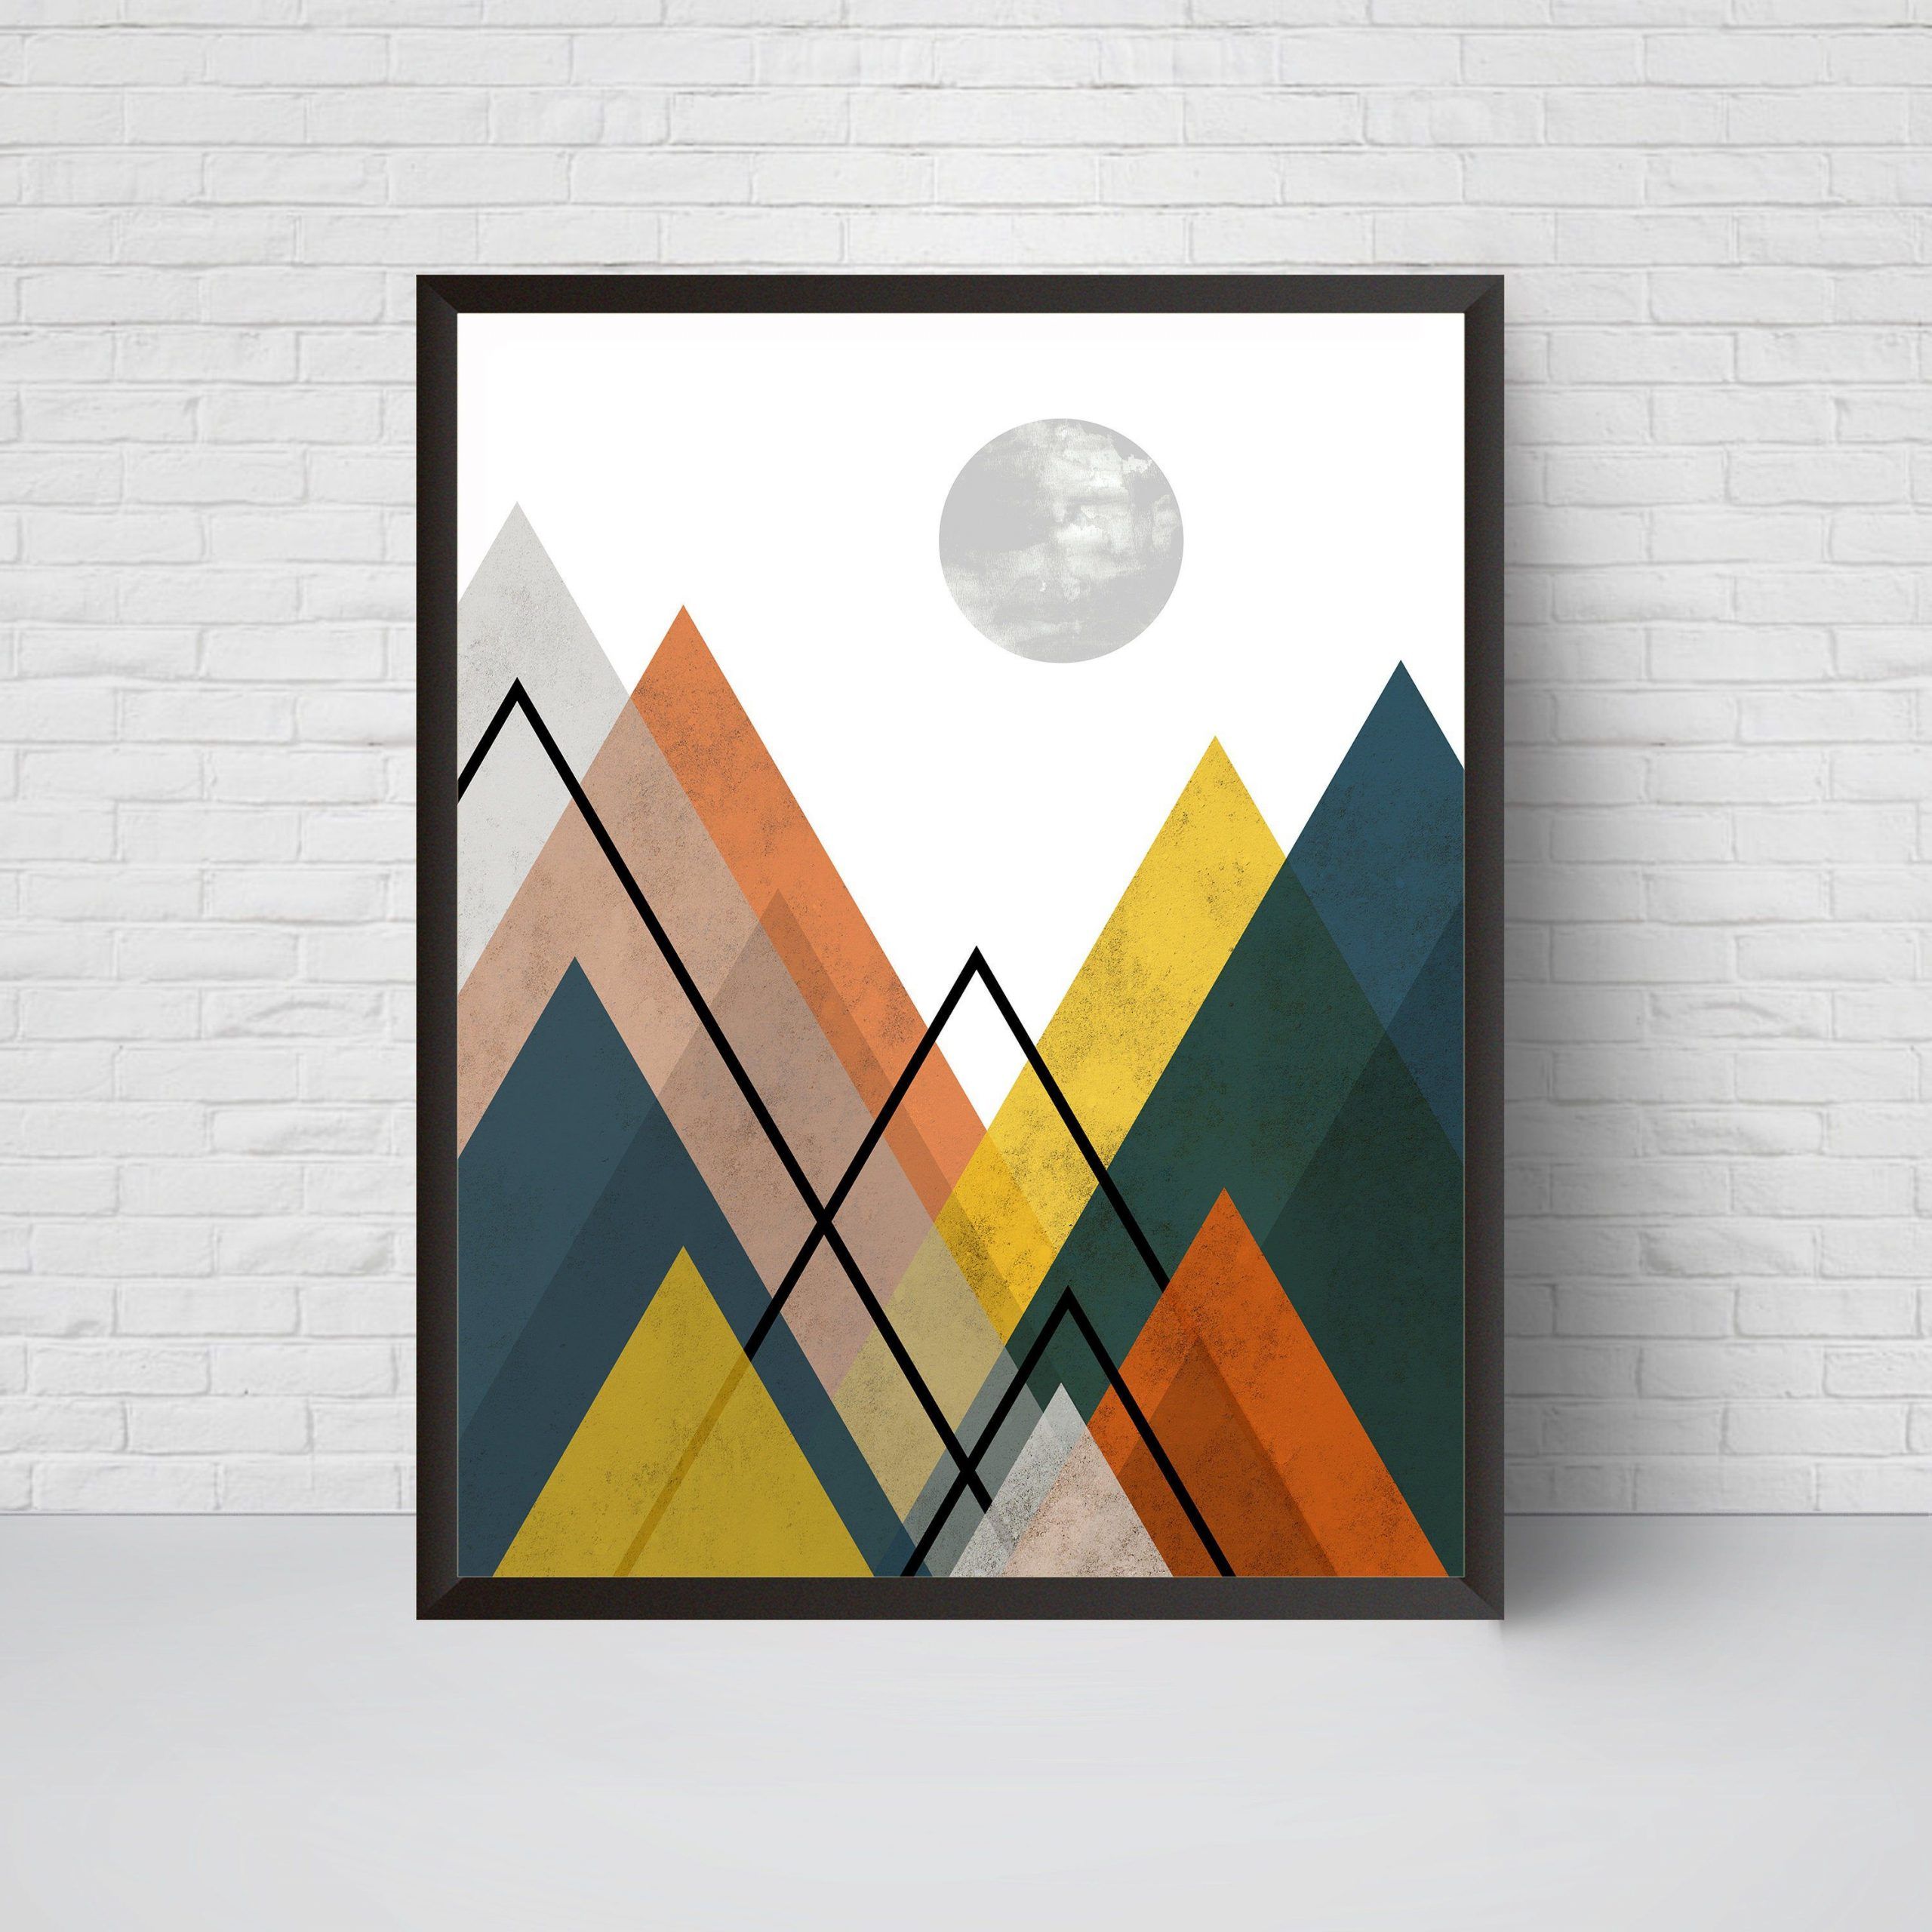 Geometric Mountain Wall Art Print, Printable Art, Mid Intended For Latest Mountain Wall Art (View 9 of 20)